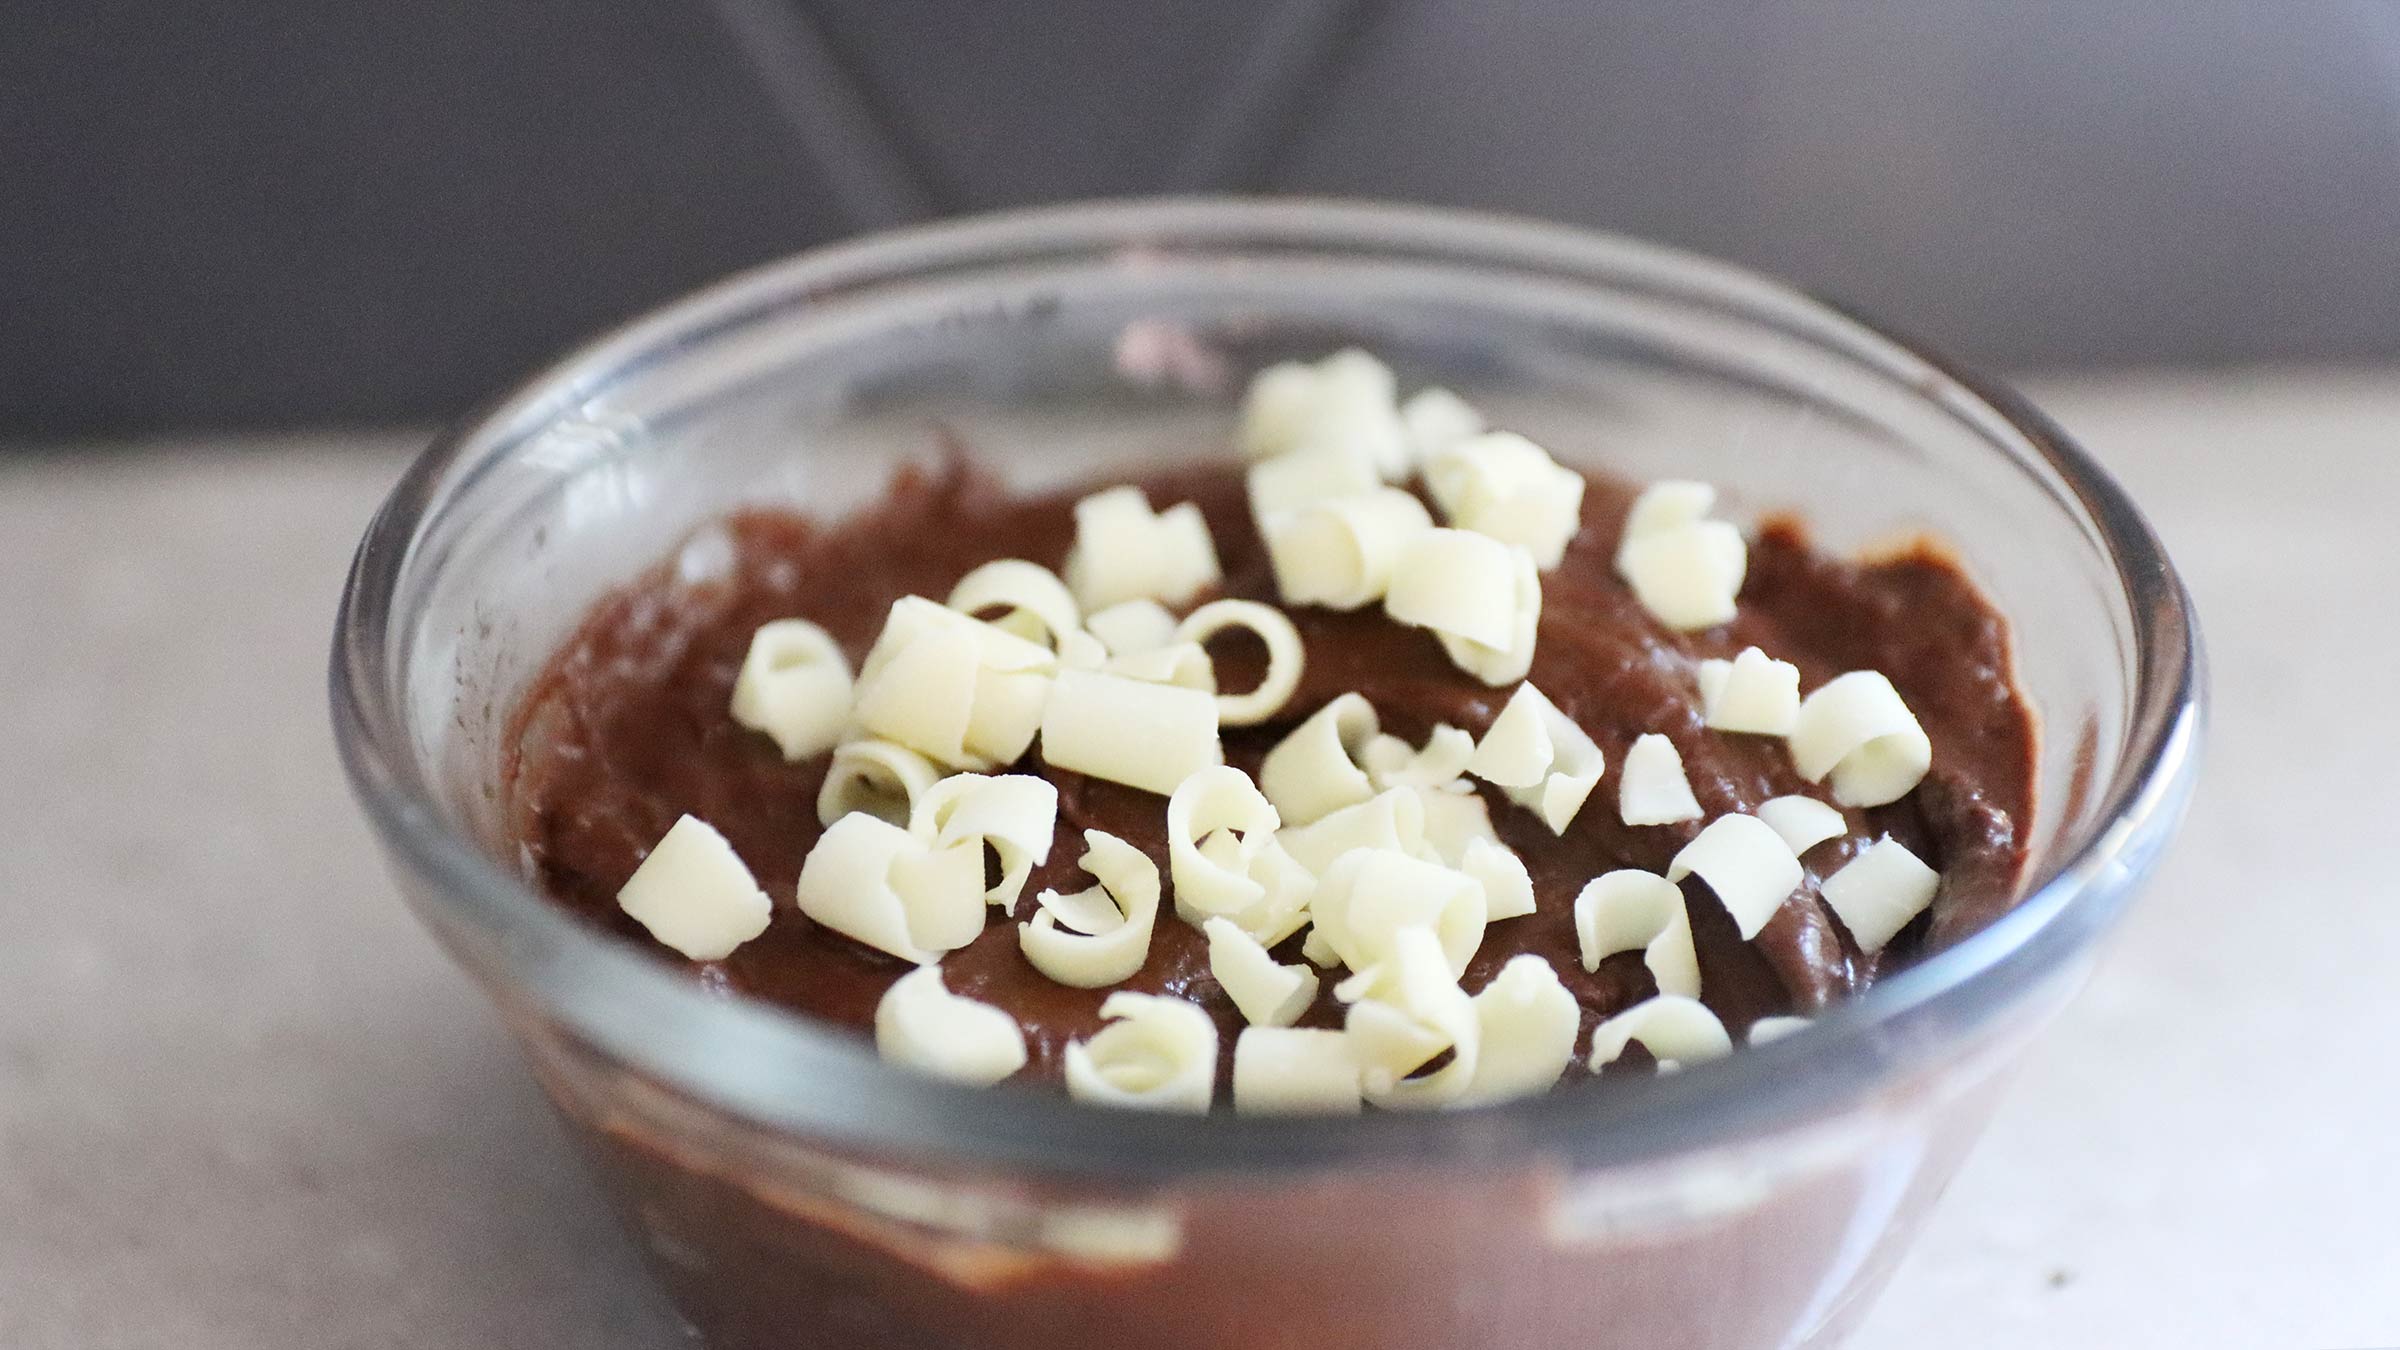 Chocolate pudding with shaved white chocolate